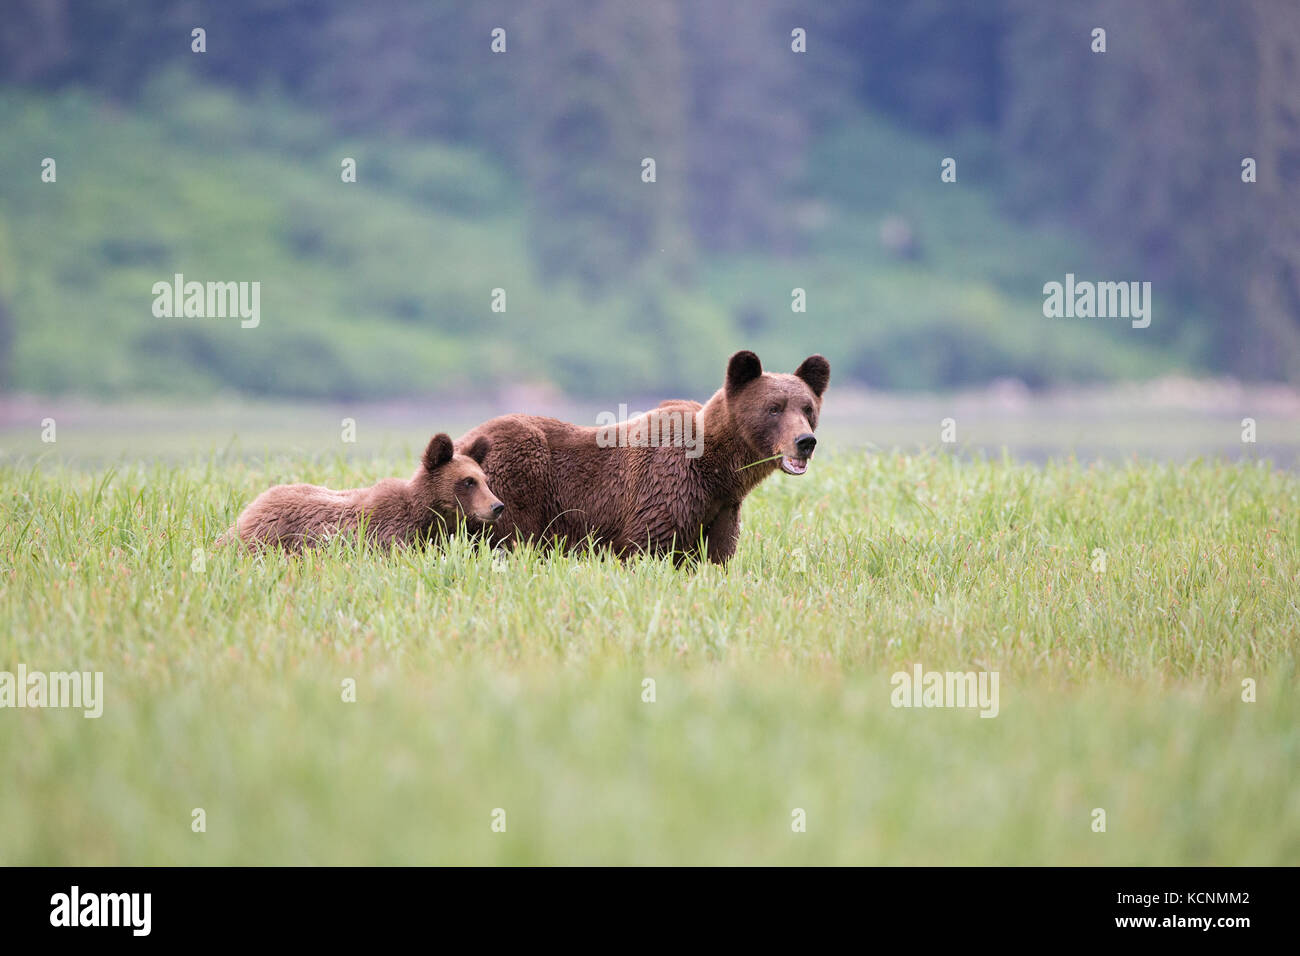 Grizzly bear (Ursus arctos horriblis), female and yearling cub, eating Lyngbye's sedge (Carex lyngbyei), Khutzeymateen Grizzly Bear Sanctuary, British Columbia, Canada. Stock Photo